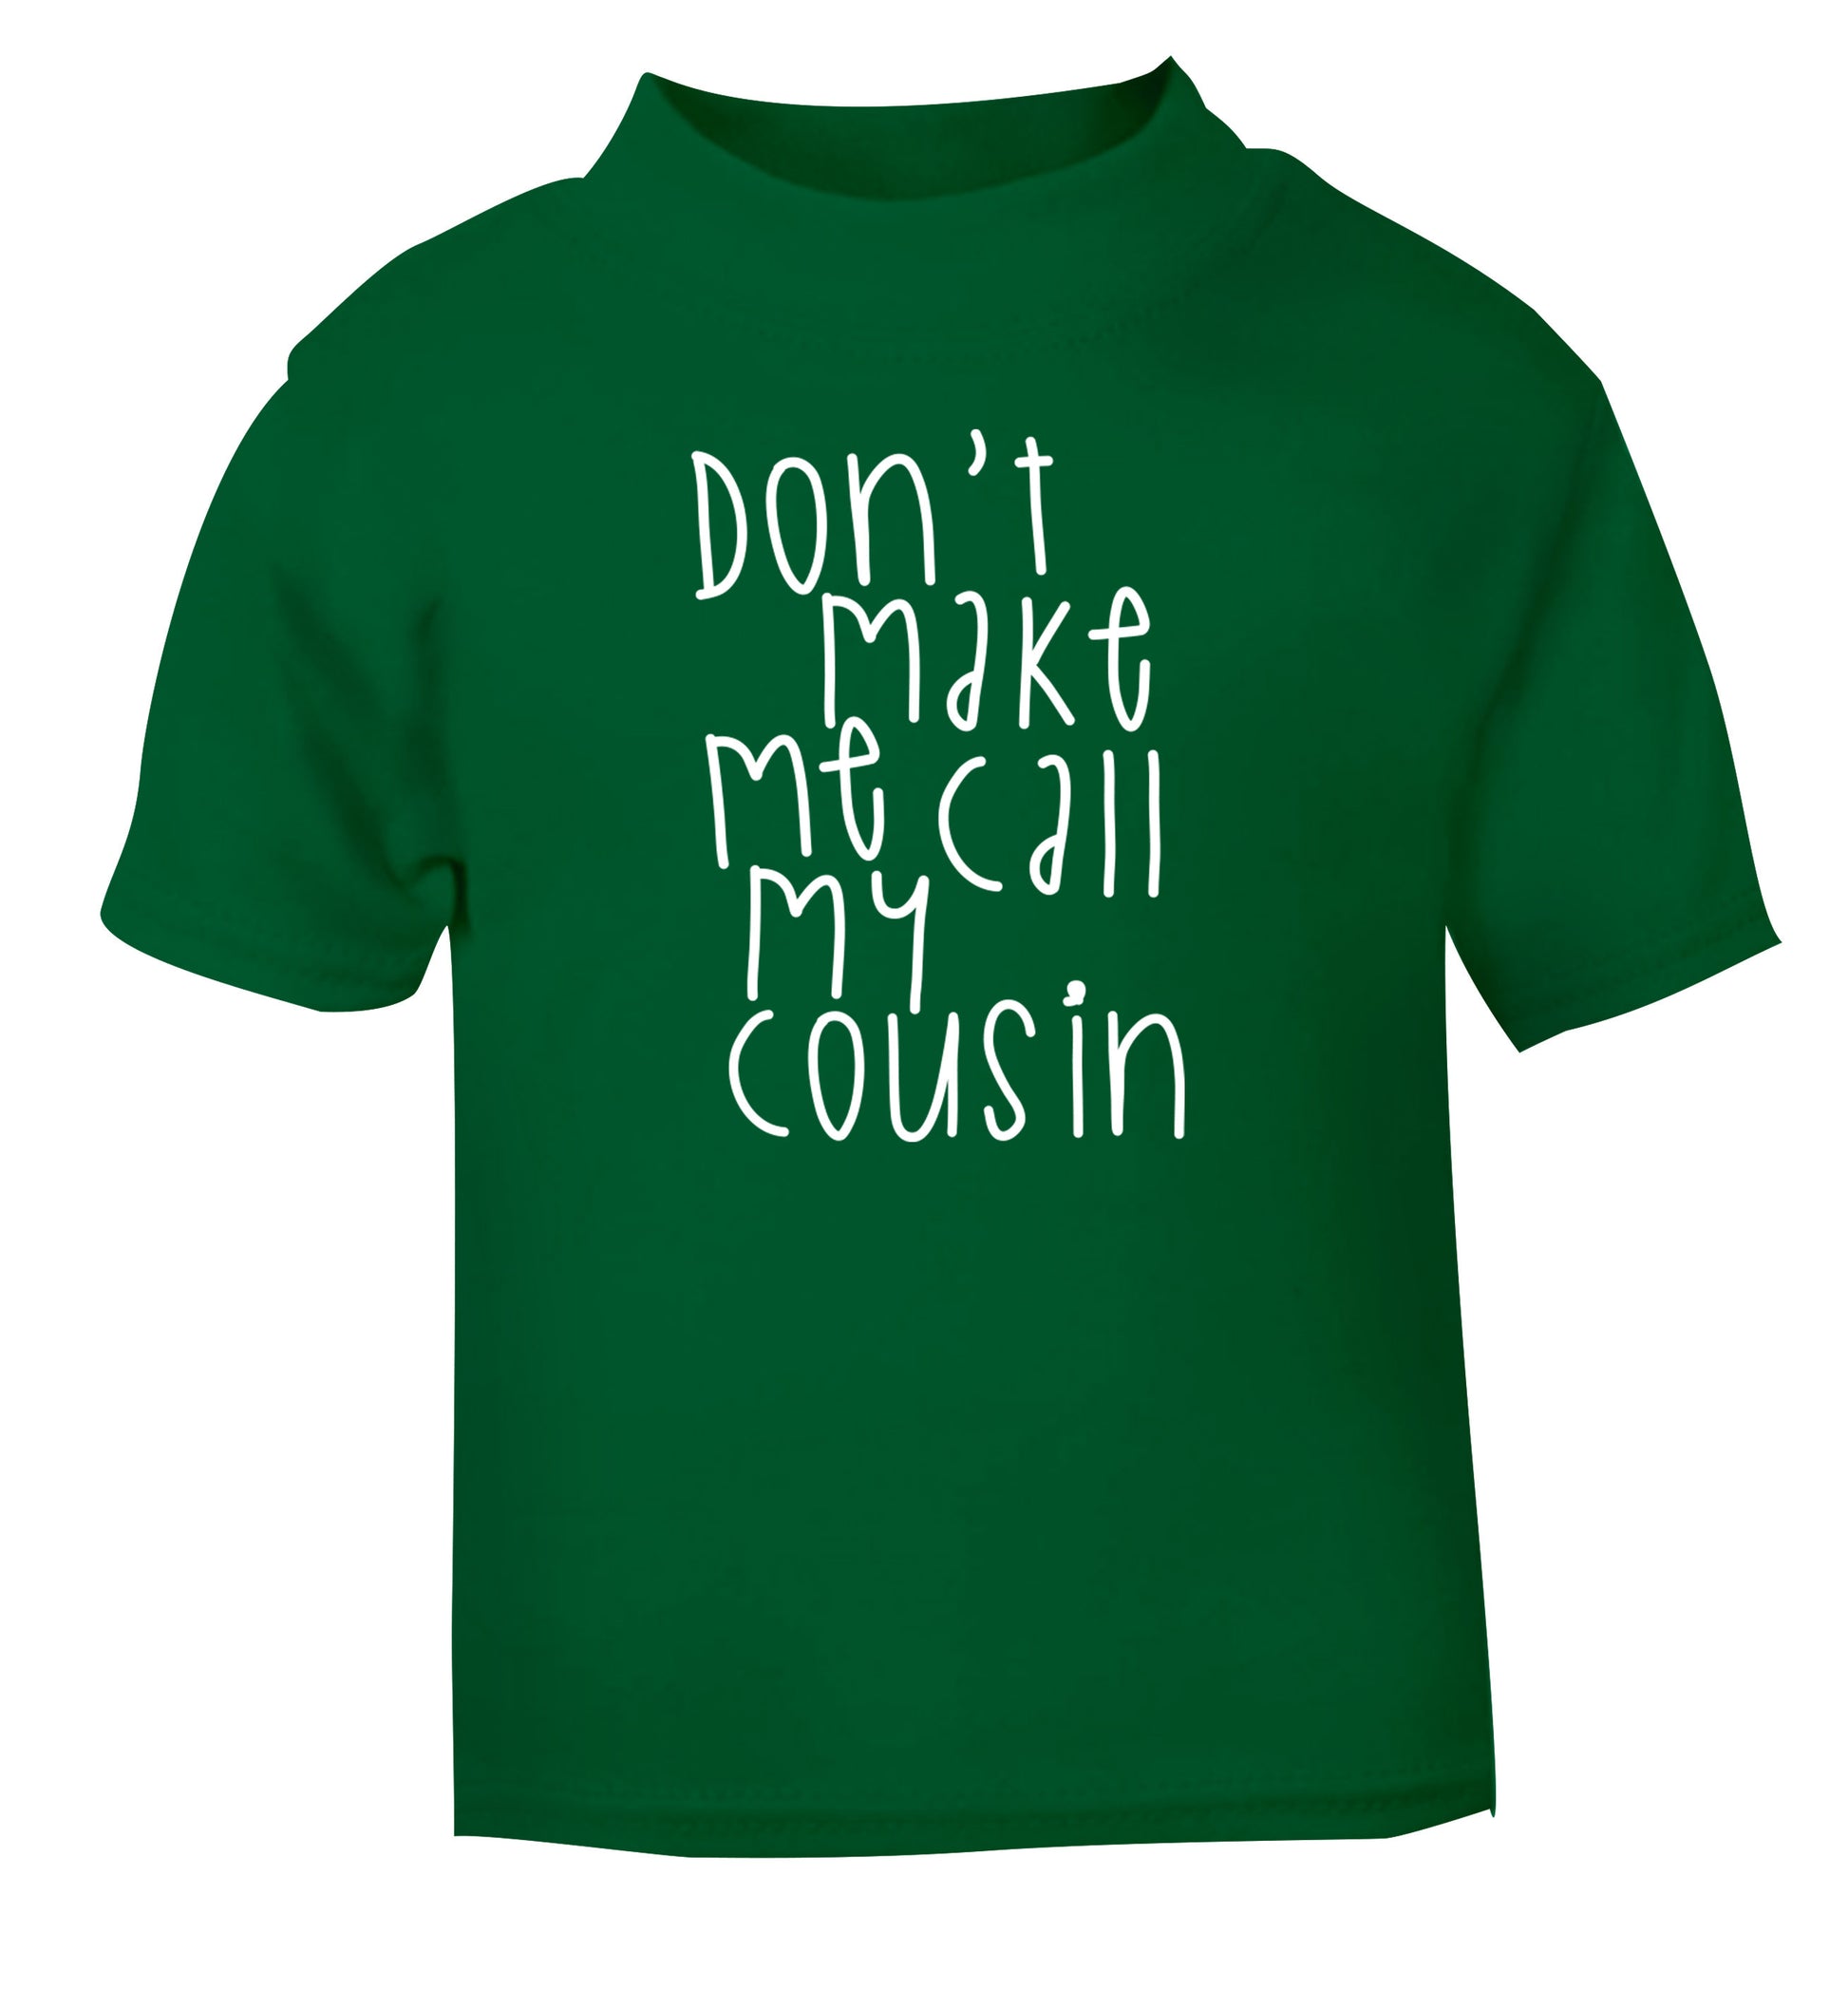 Don't make me call my cousin green Baby Toddler Tshirt 2 Years